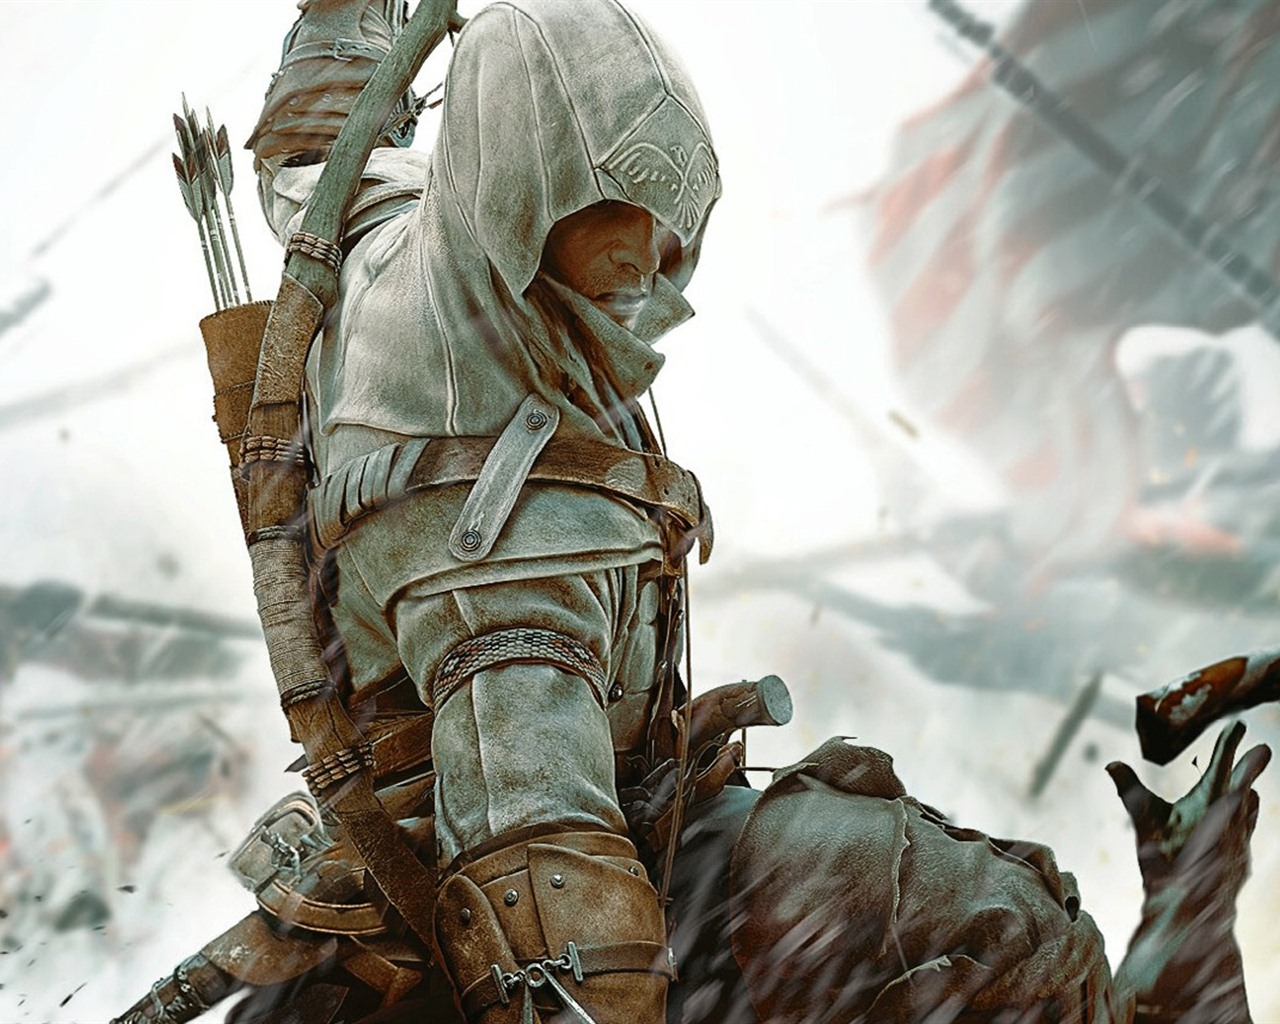 Assassin's Creed 3 HD wallpapers #18 - 1280x1024